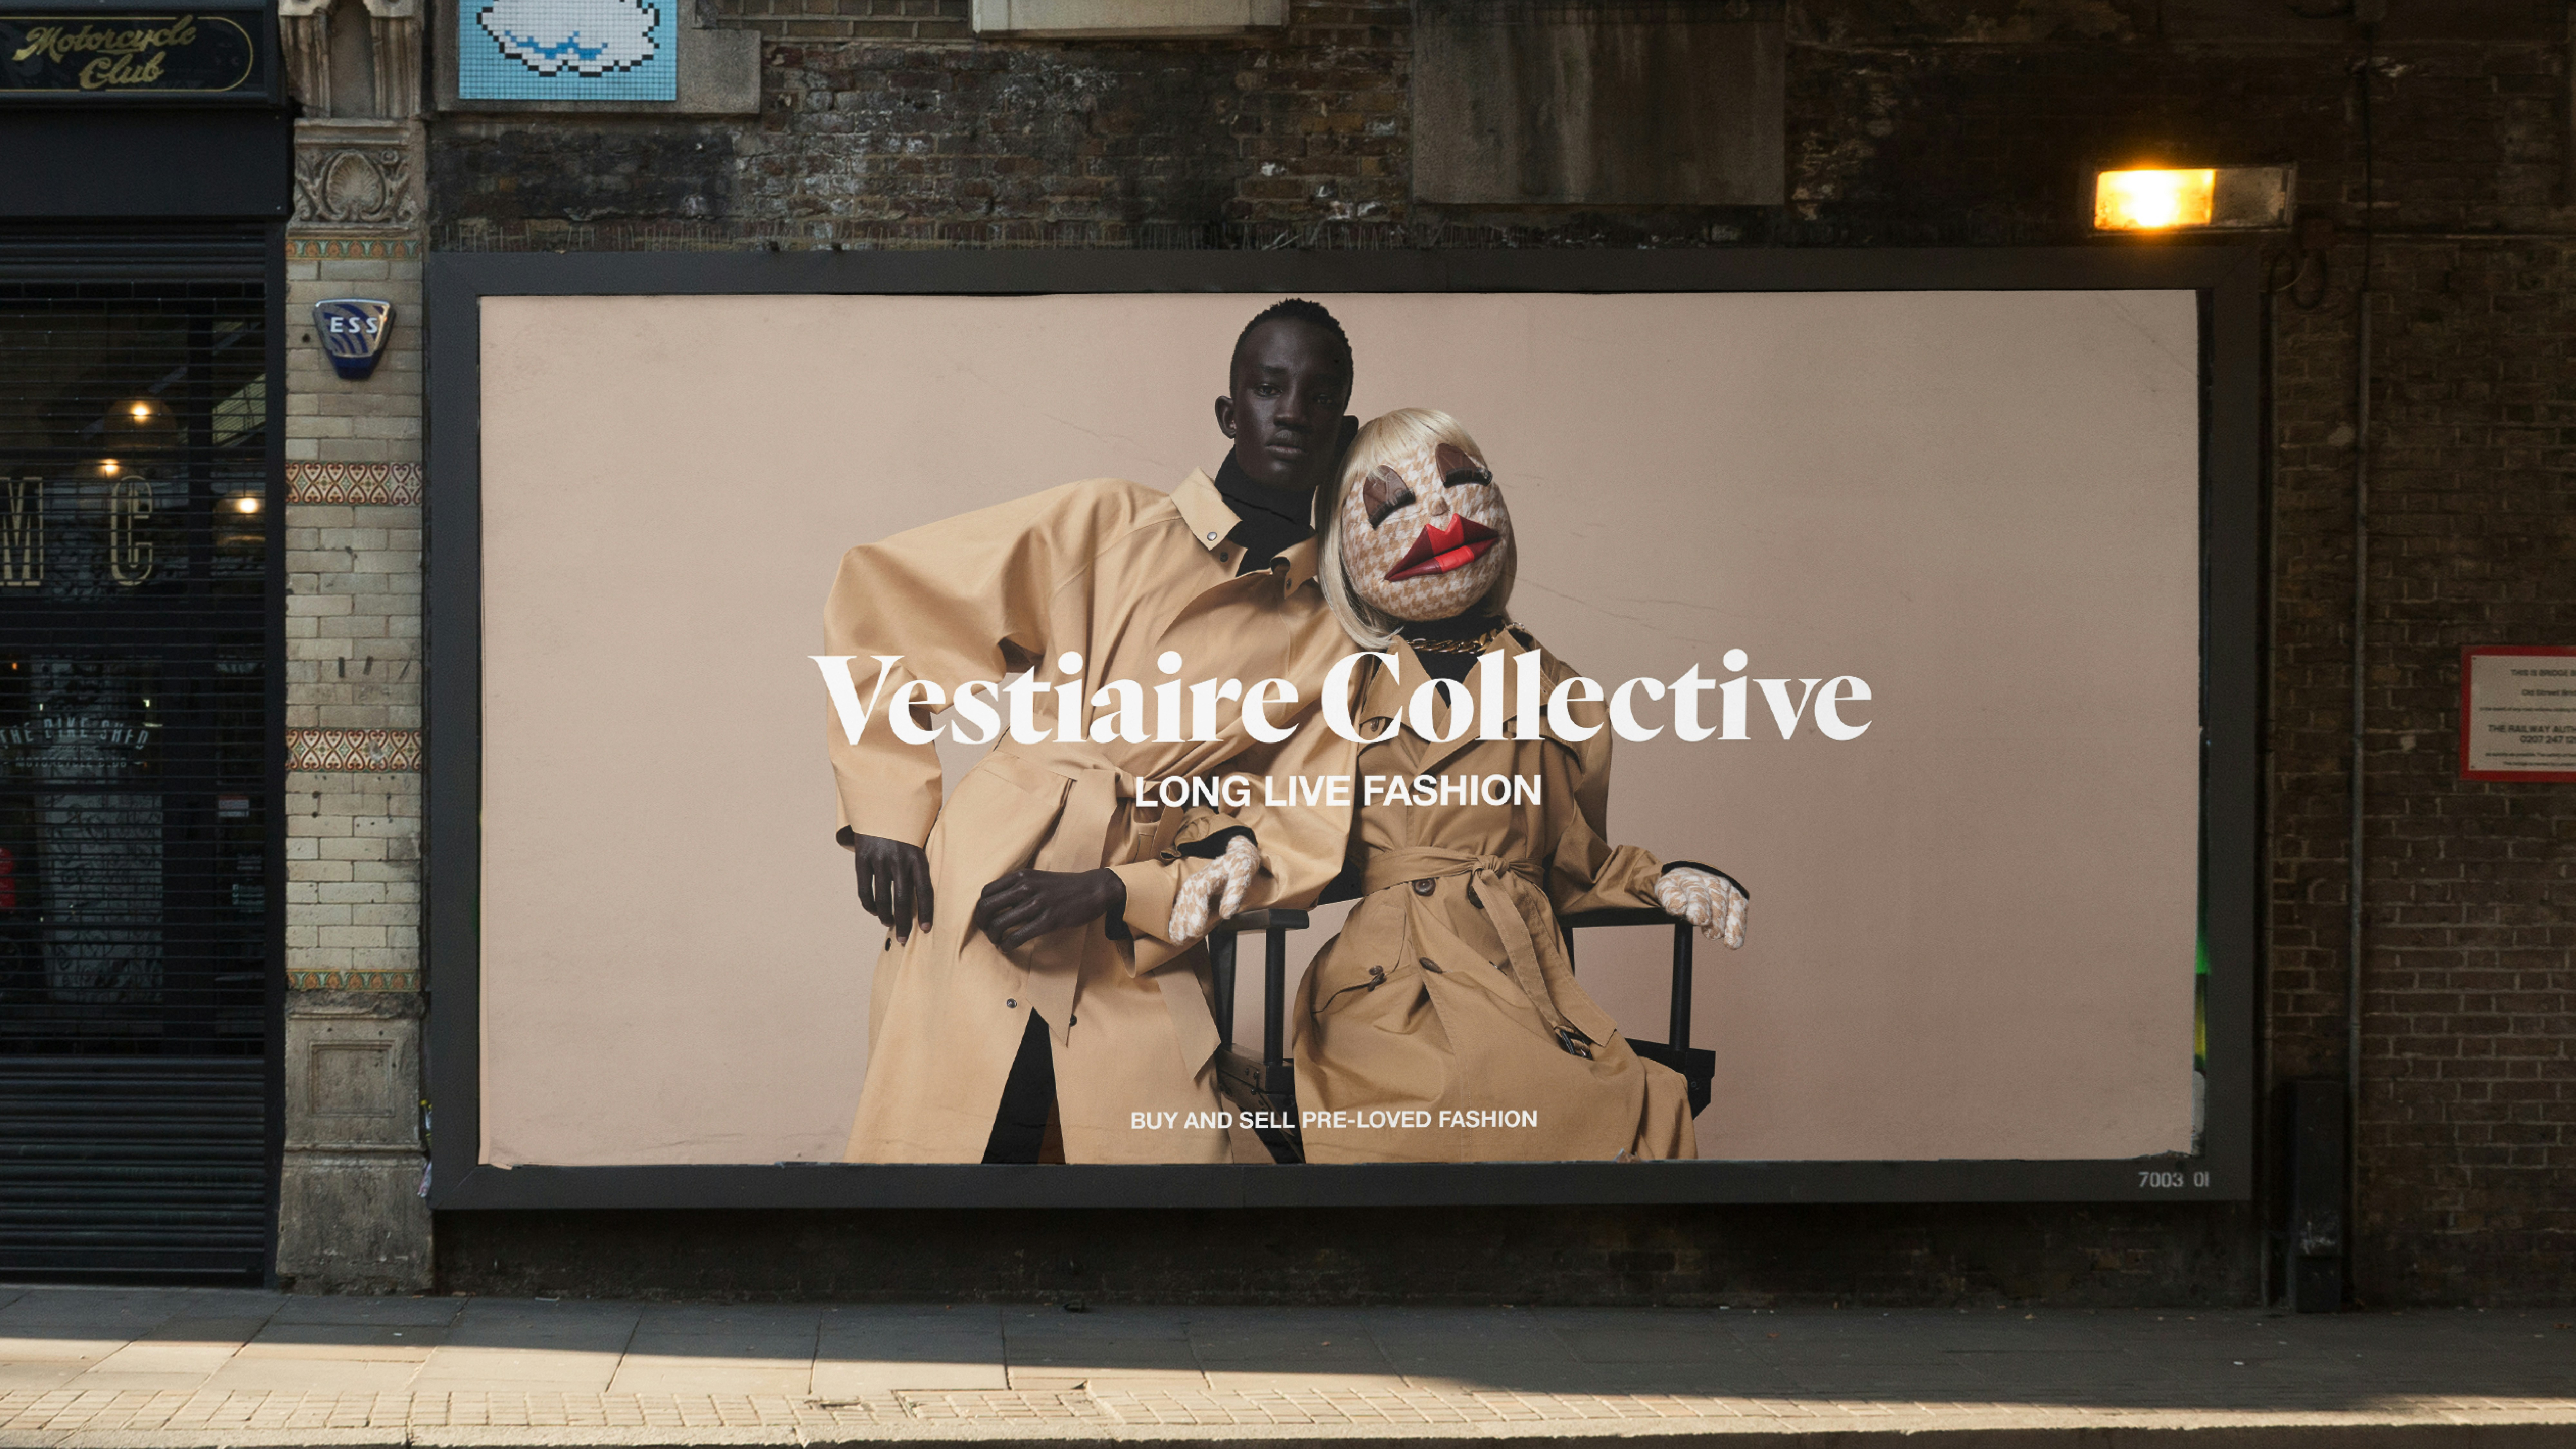 In Droga5's Vestiaire Collective campaign, the clothes become the